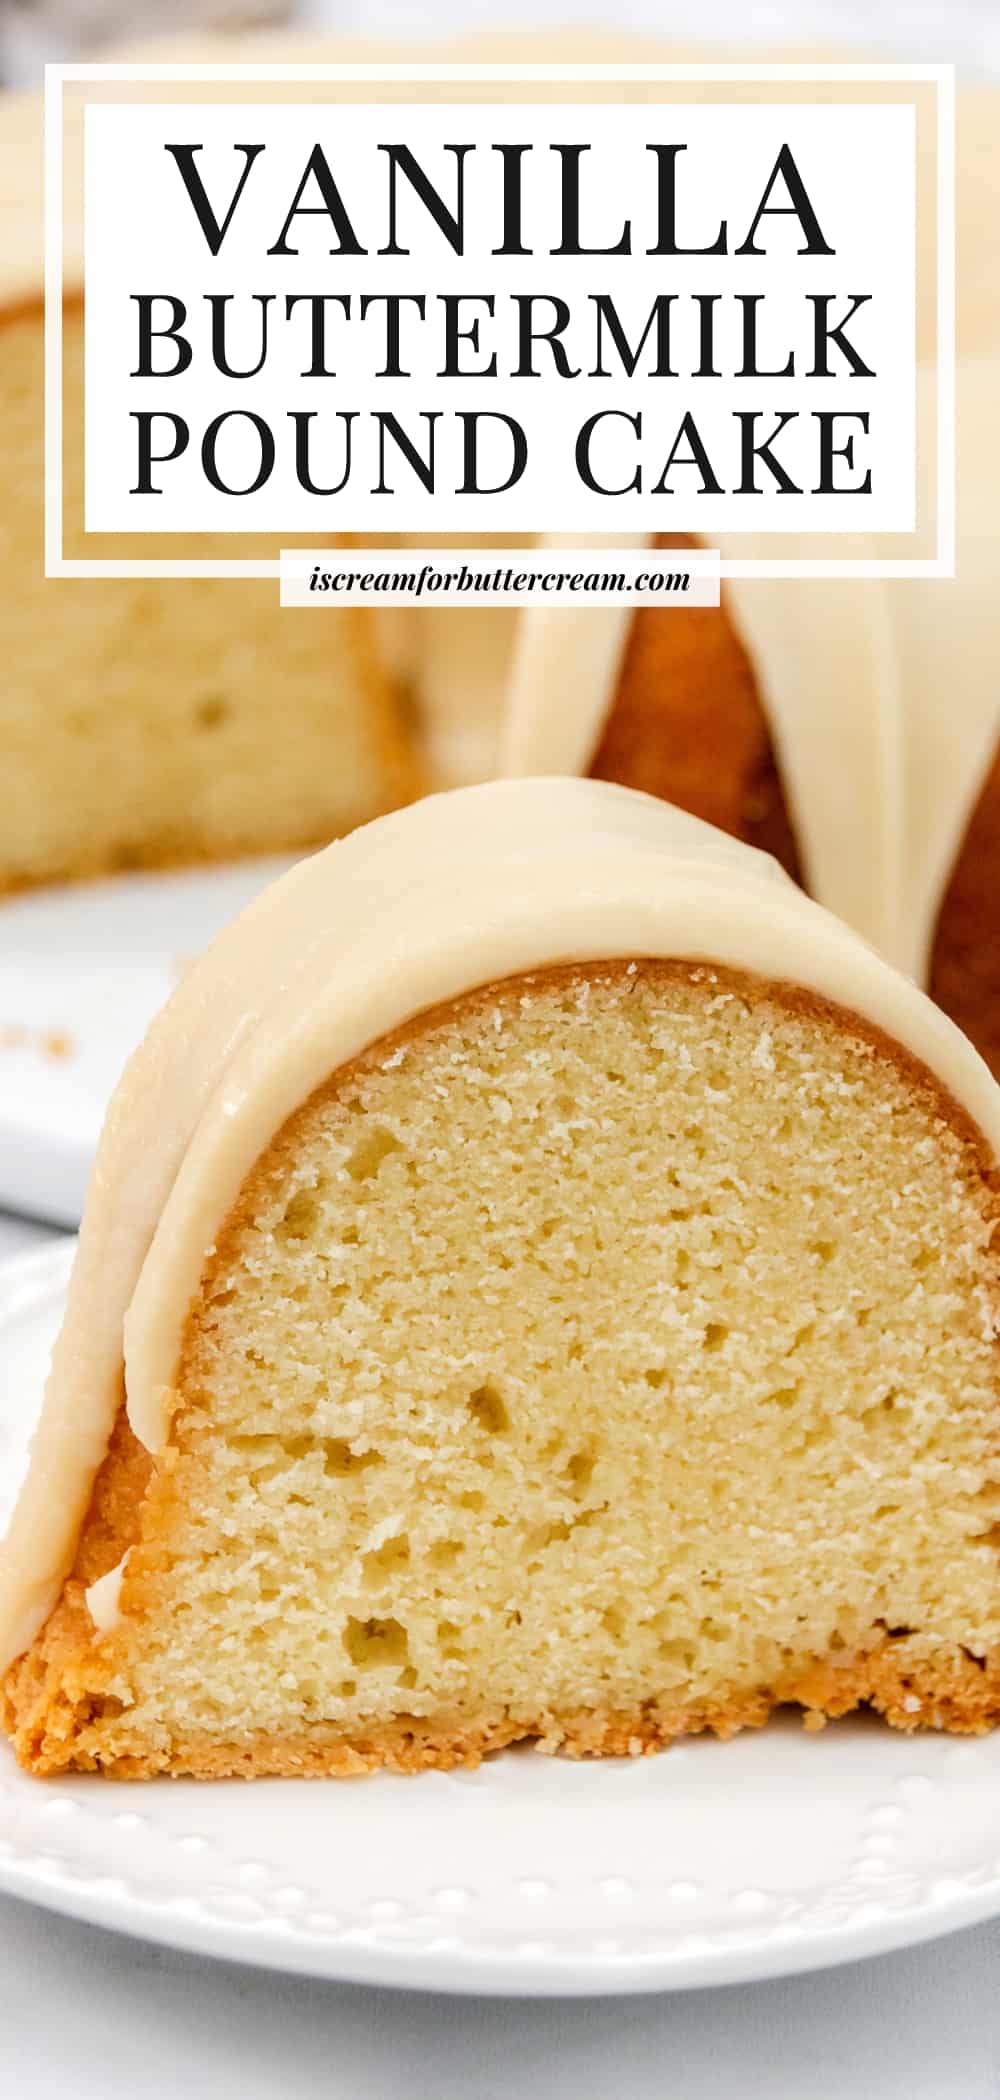 Pinterest image with text overlay and close up image of buttermilk pound cake.